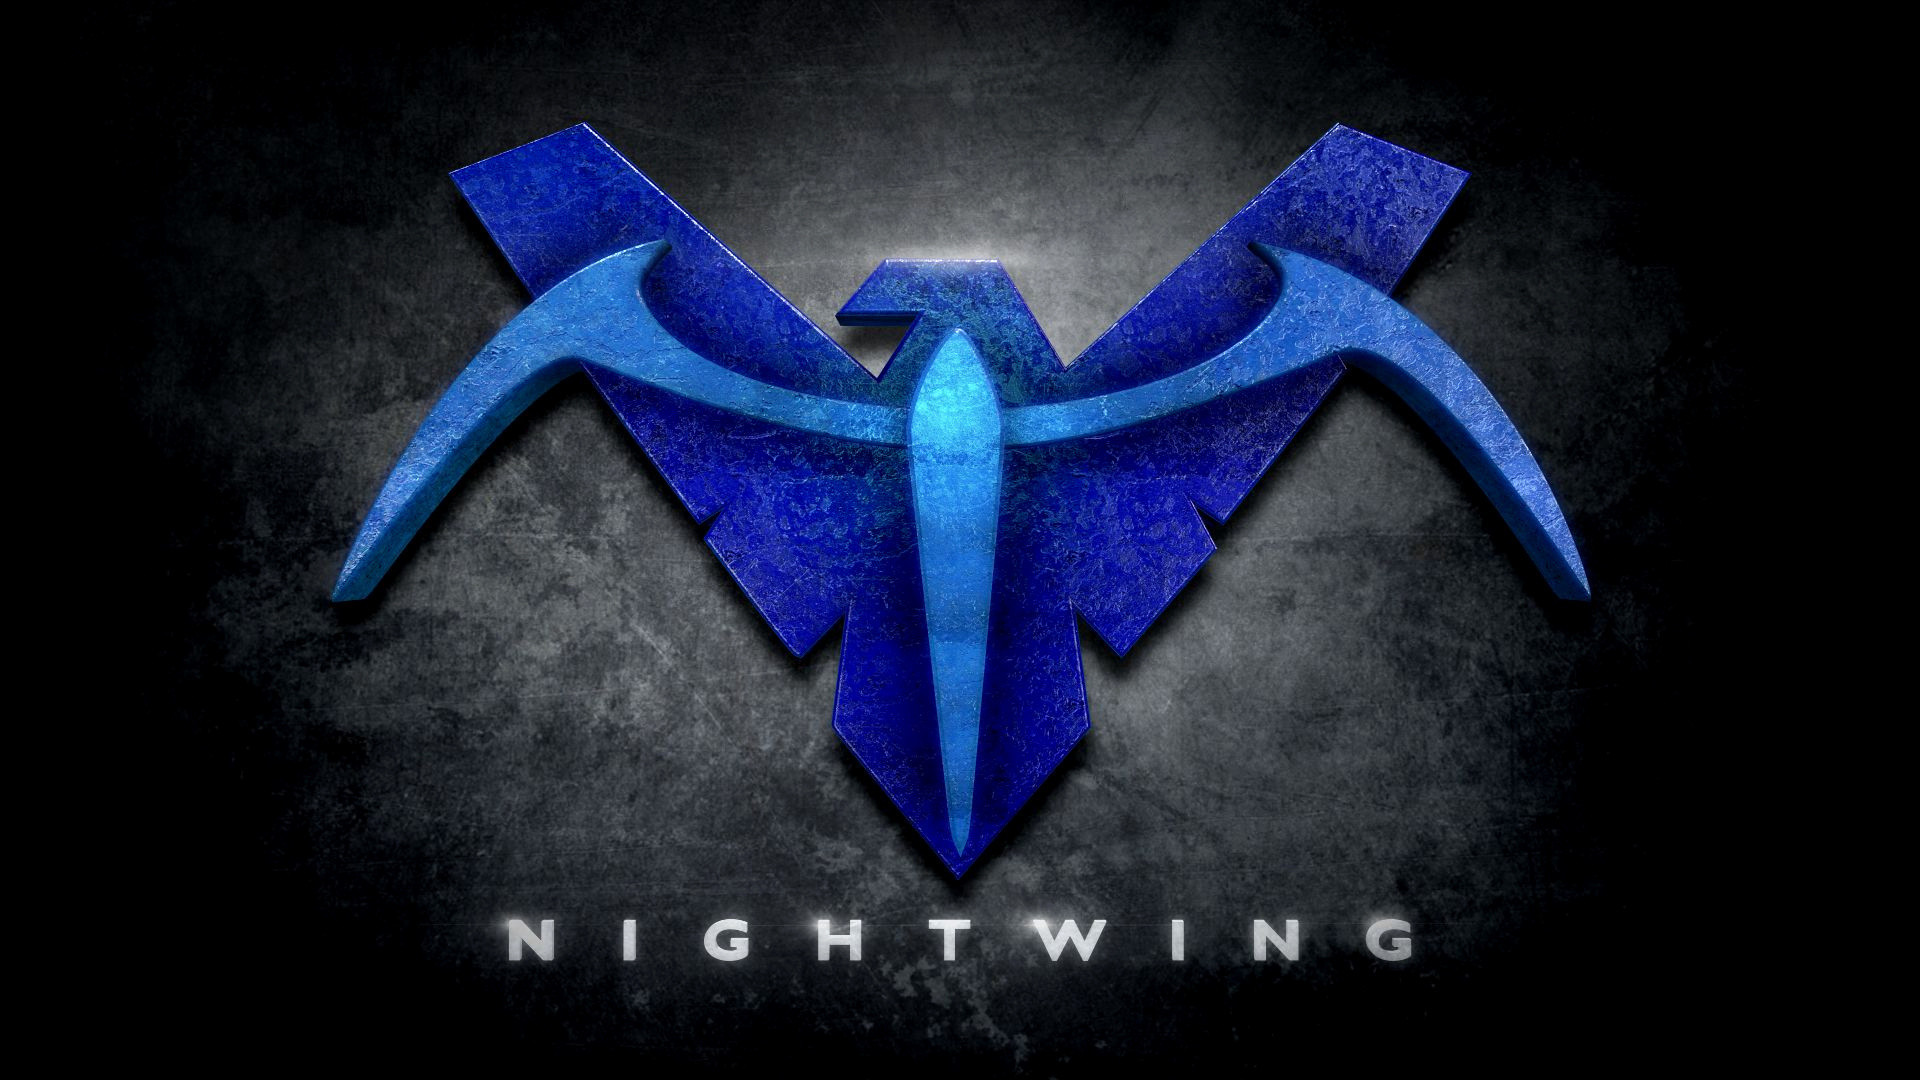 1920x1080  Images: Nightwing Wallpaper Iphone 1280Ã—720 Nightwing Wallpaper  (37 Wallpapers) | Adorable